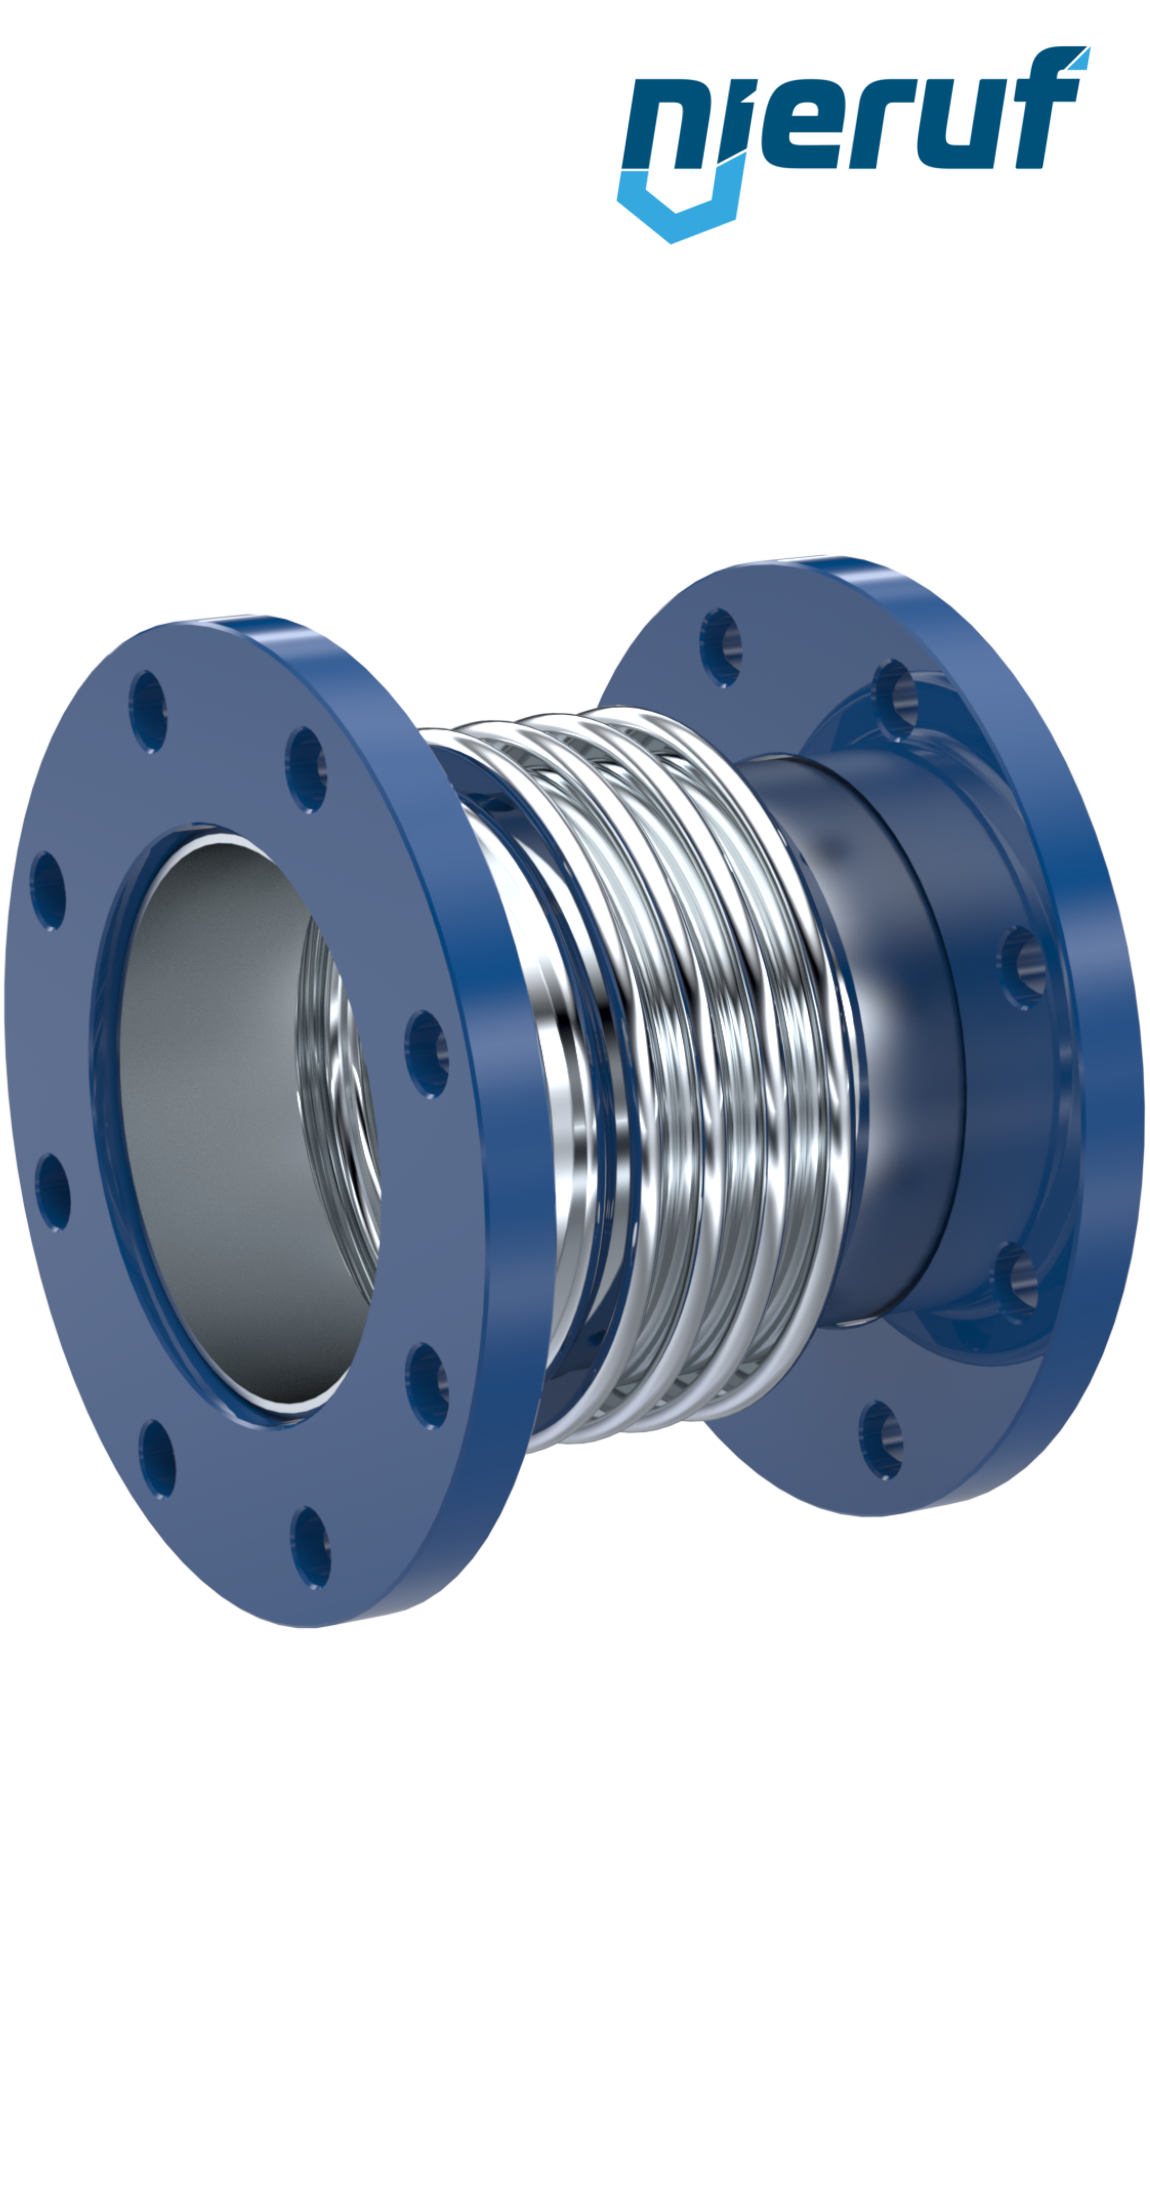 Axial expansion joint DN250 type KP05 fixed flanges and stainless steel-bellows